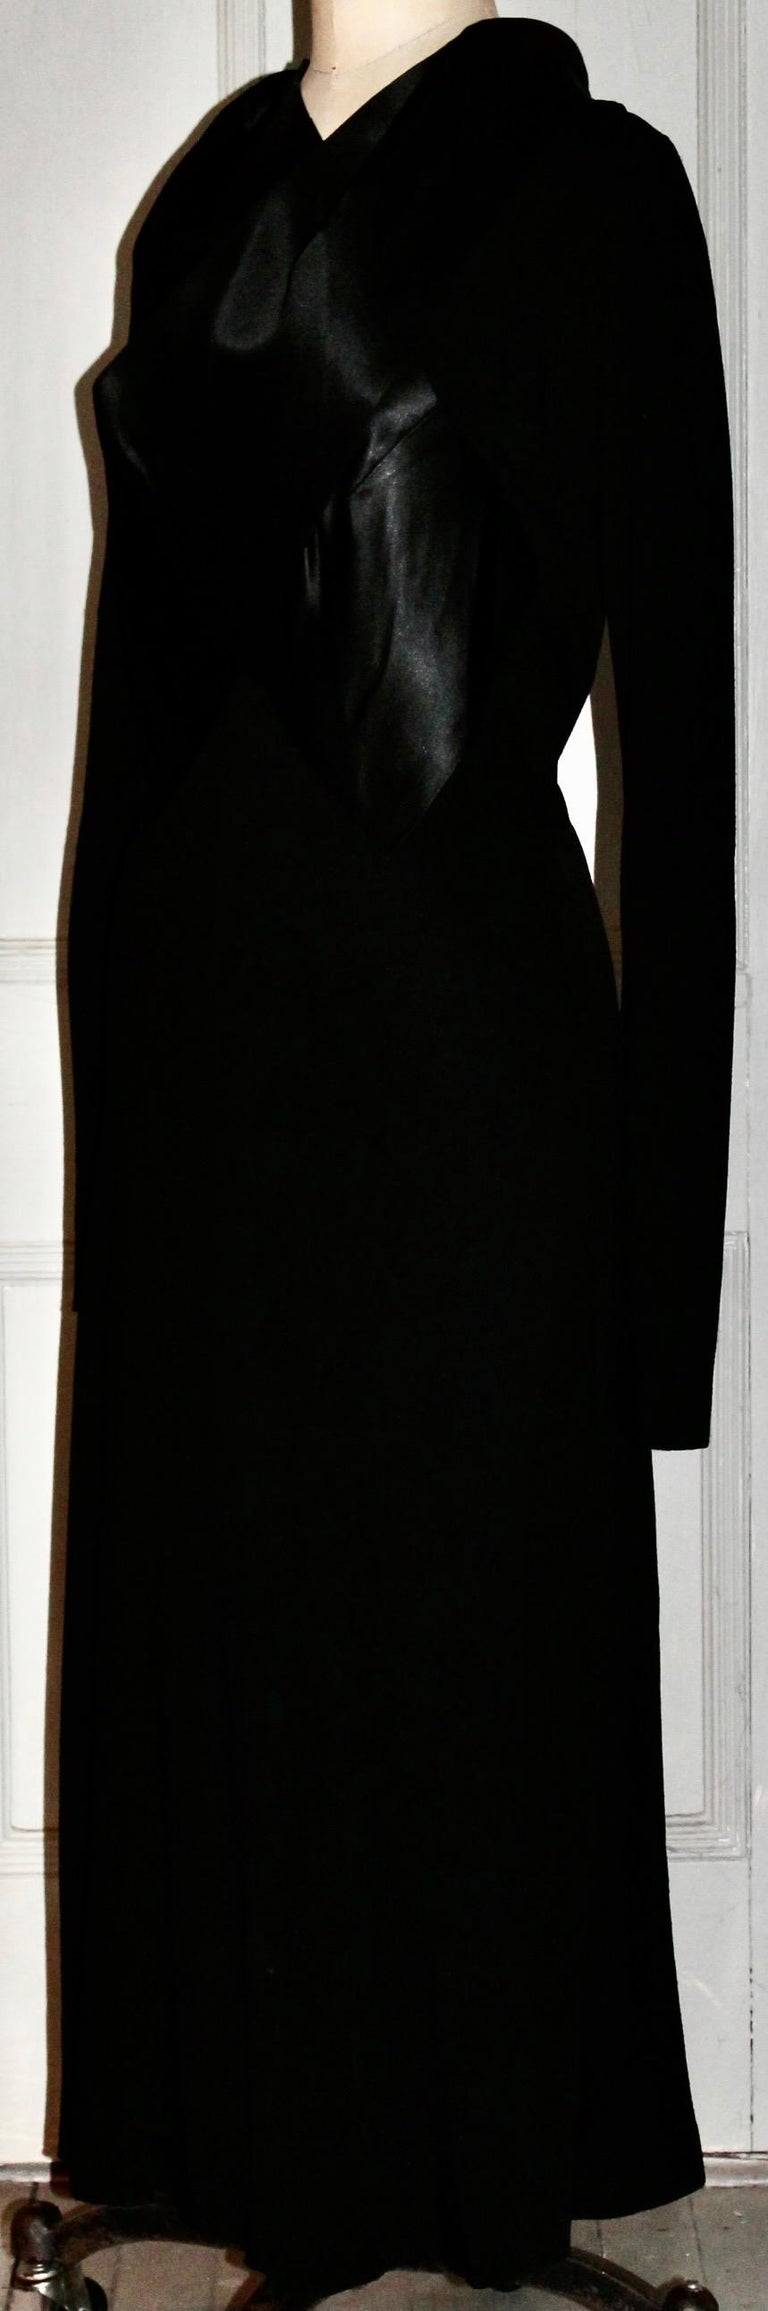 France Vramant Black Crepe Silk Evening Gown, 1930's Paris For Sale at  1stDibs